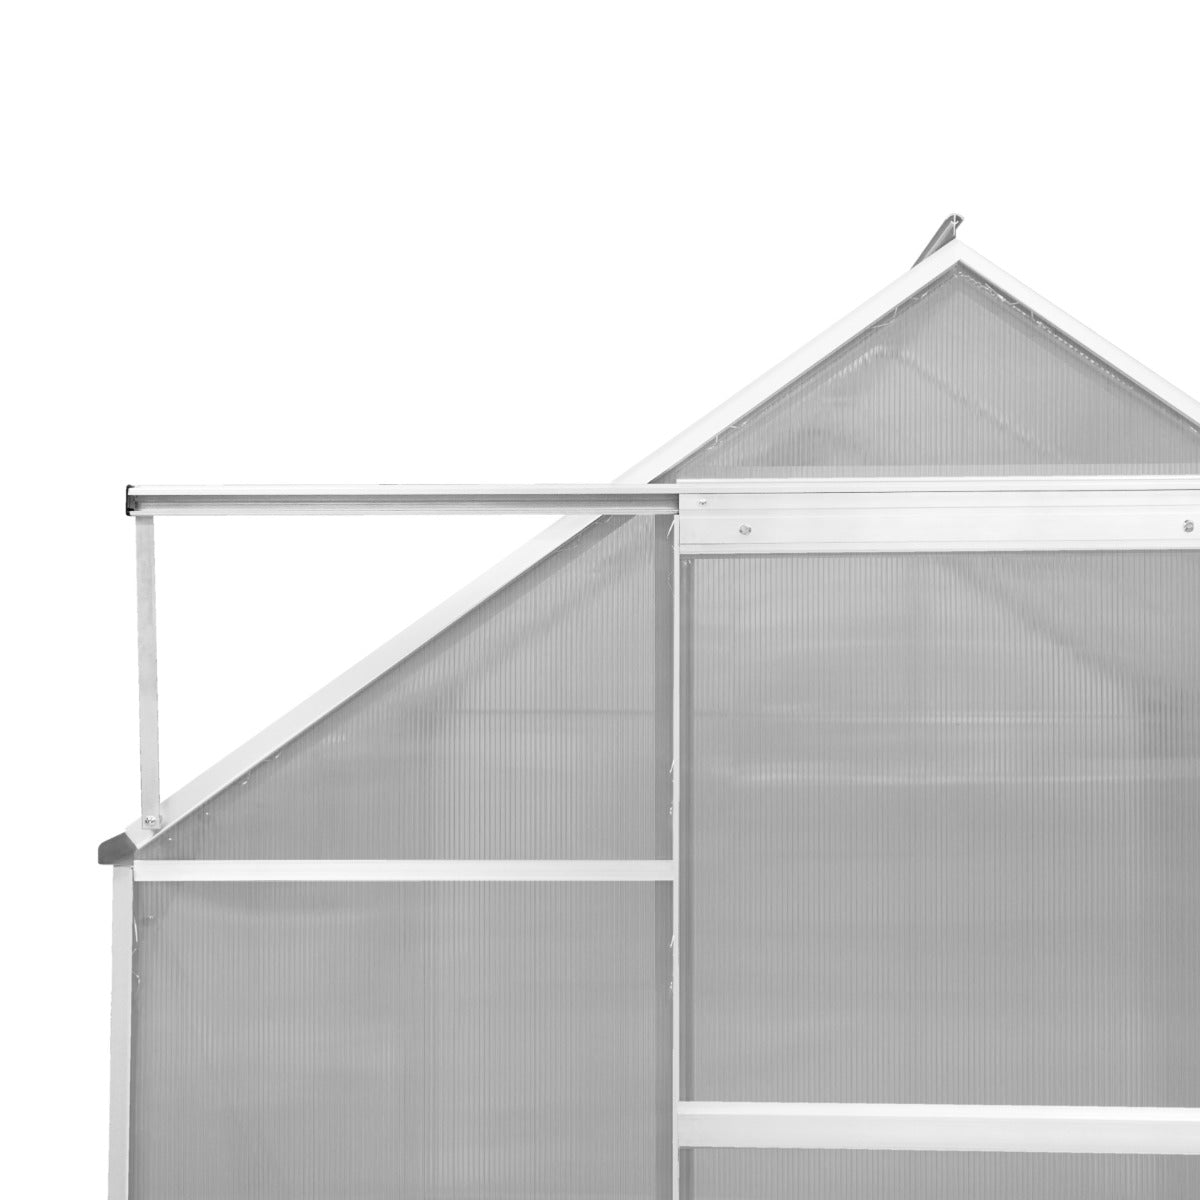 Polycarbonate Greenhouse 6ft x 10ft with Base – Silver